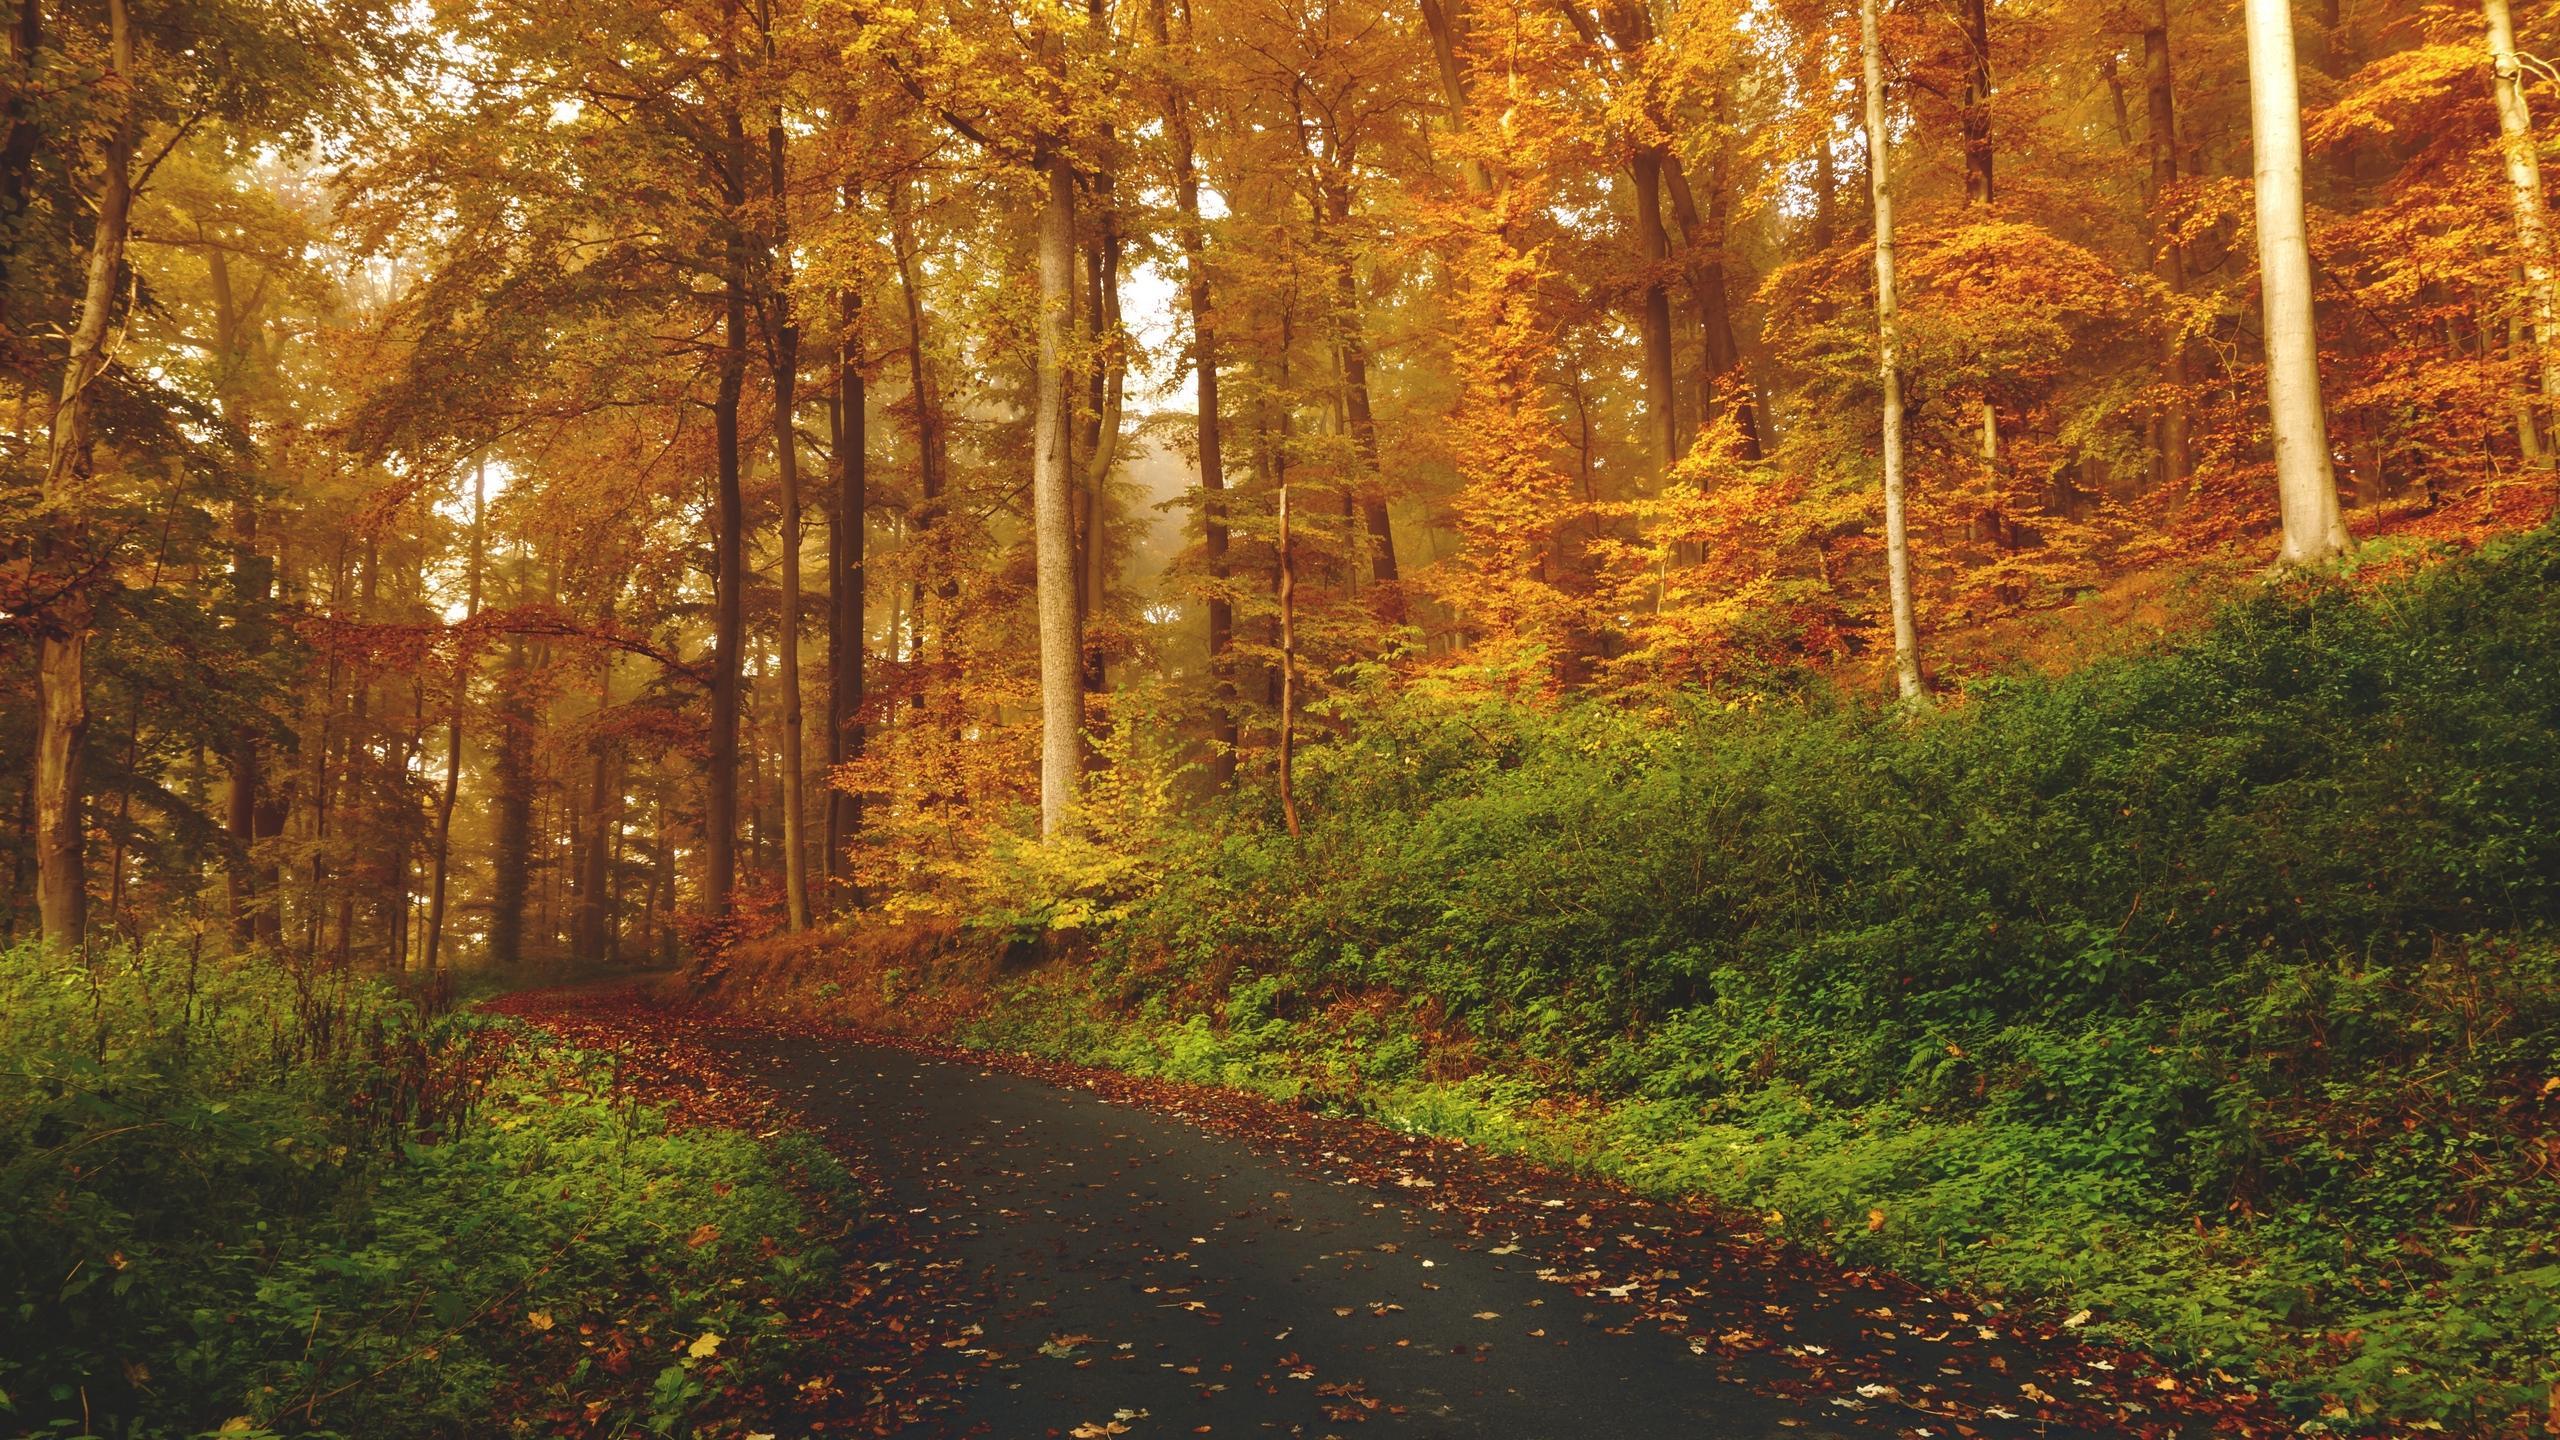 Download wallpaper 2560x1440 autumn, trees, forest, trail widescreen 16:9 HD background